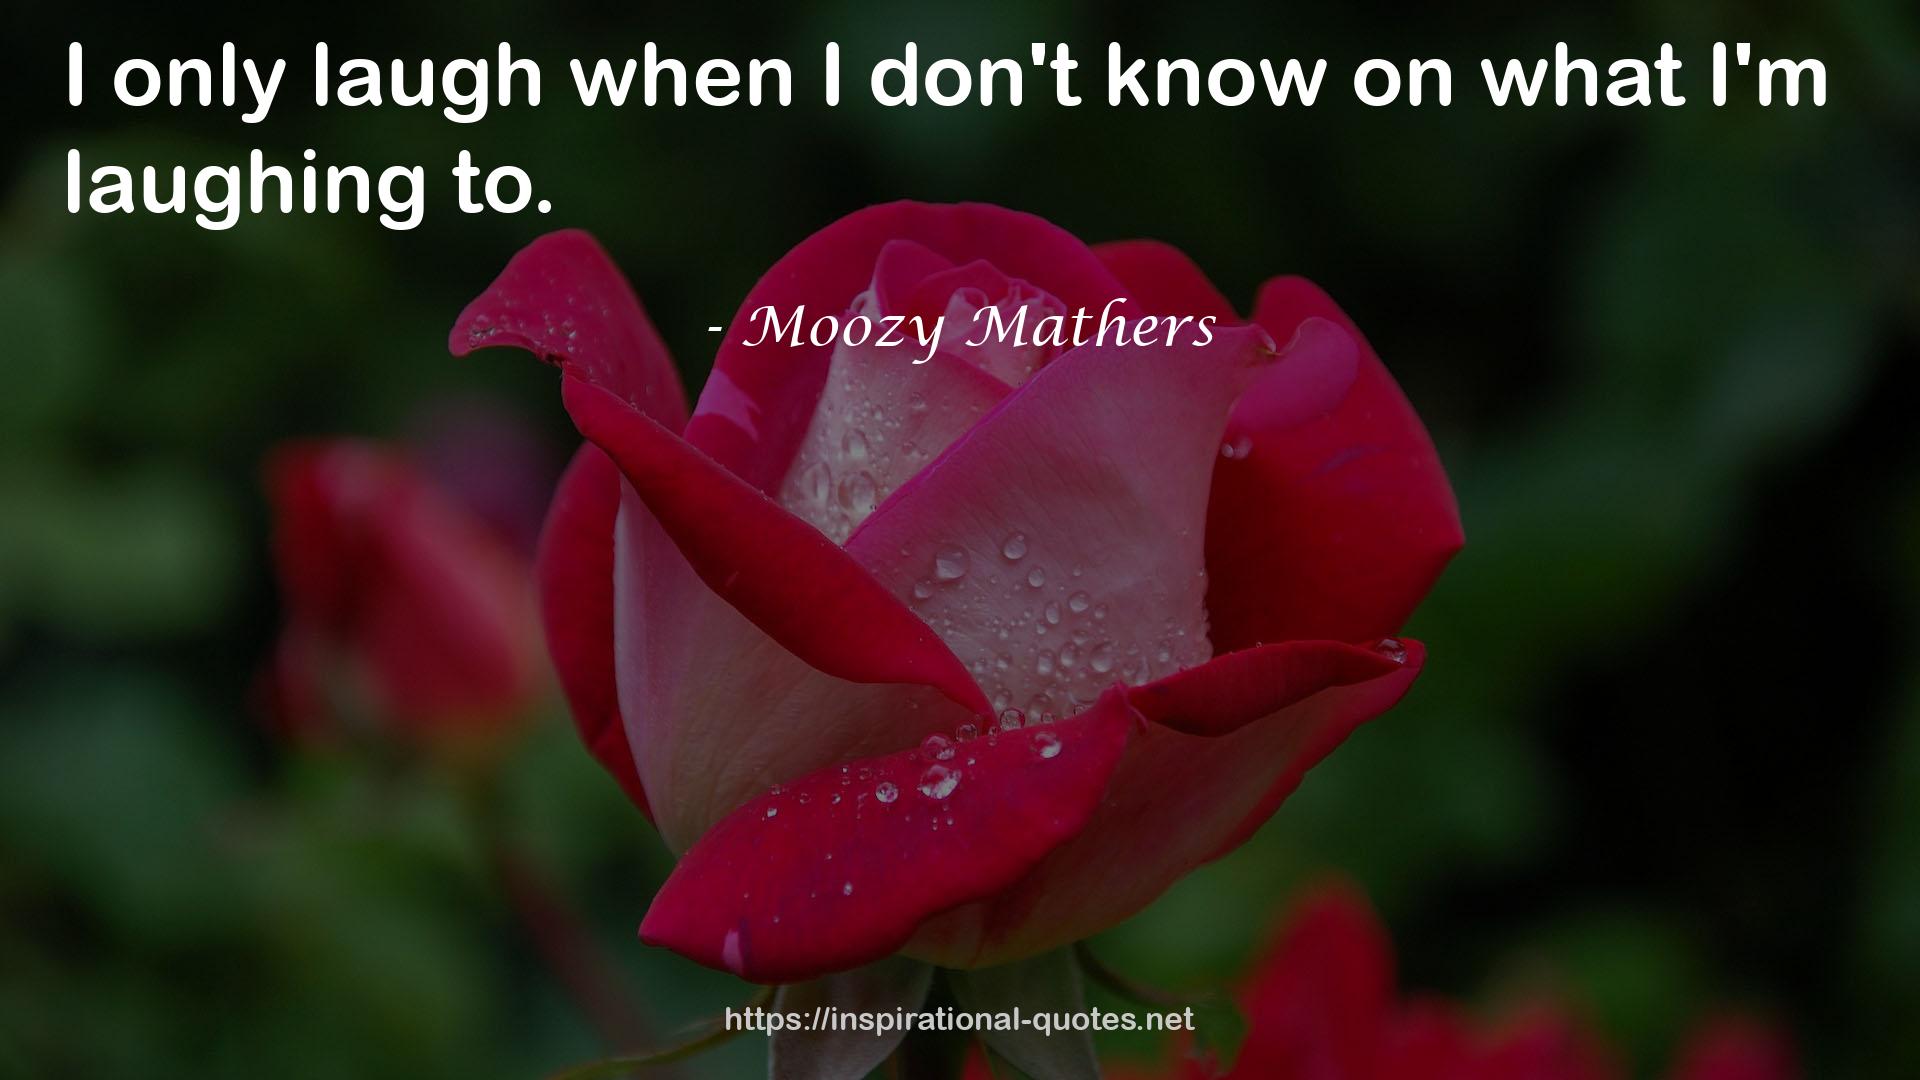 Moozy Mathers QUOTES